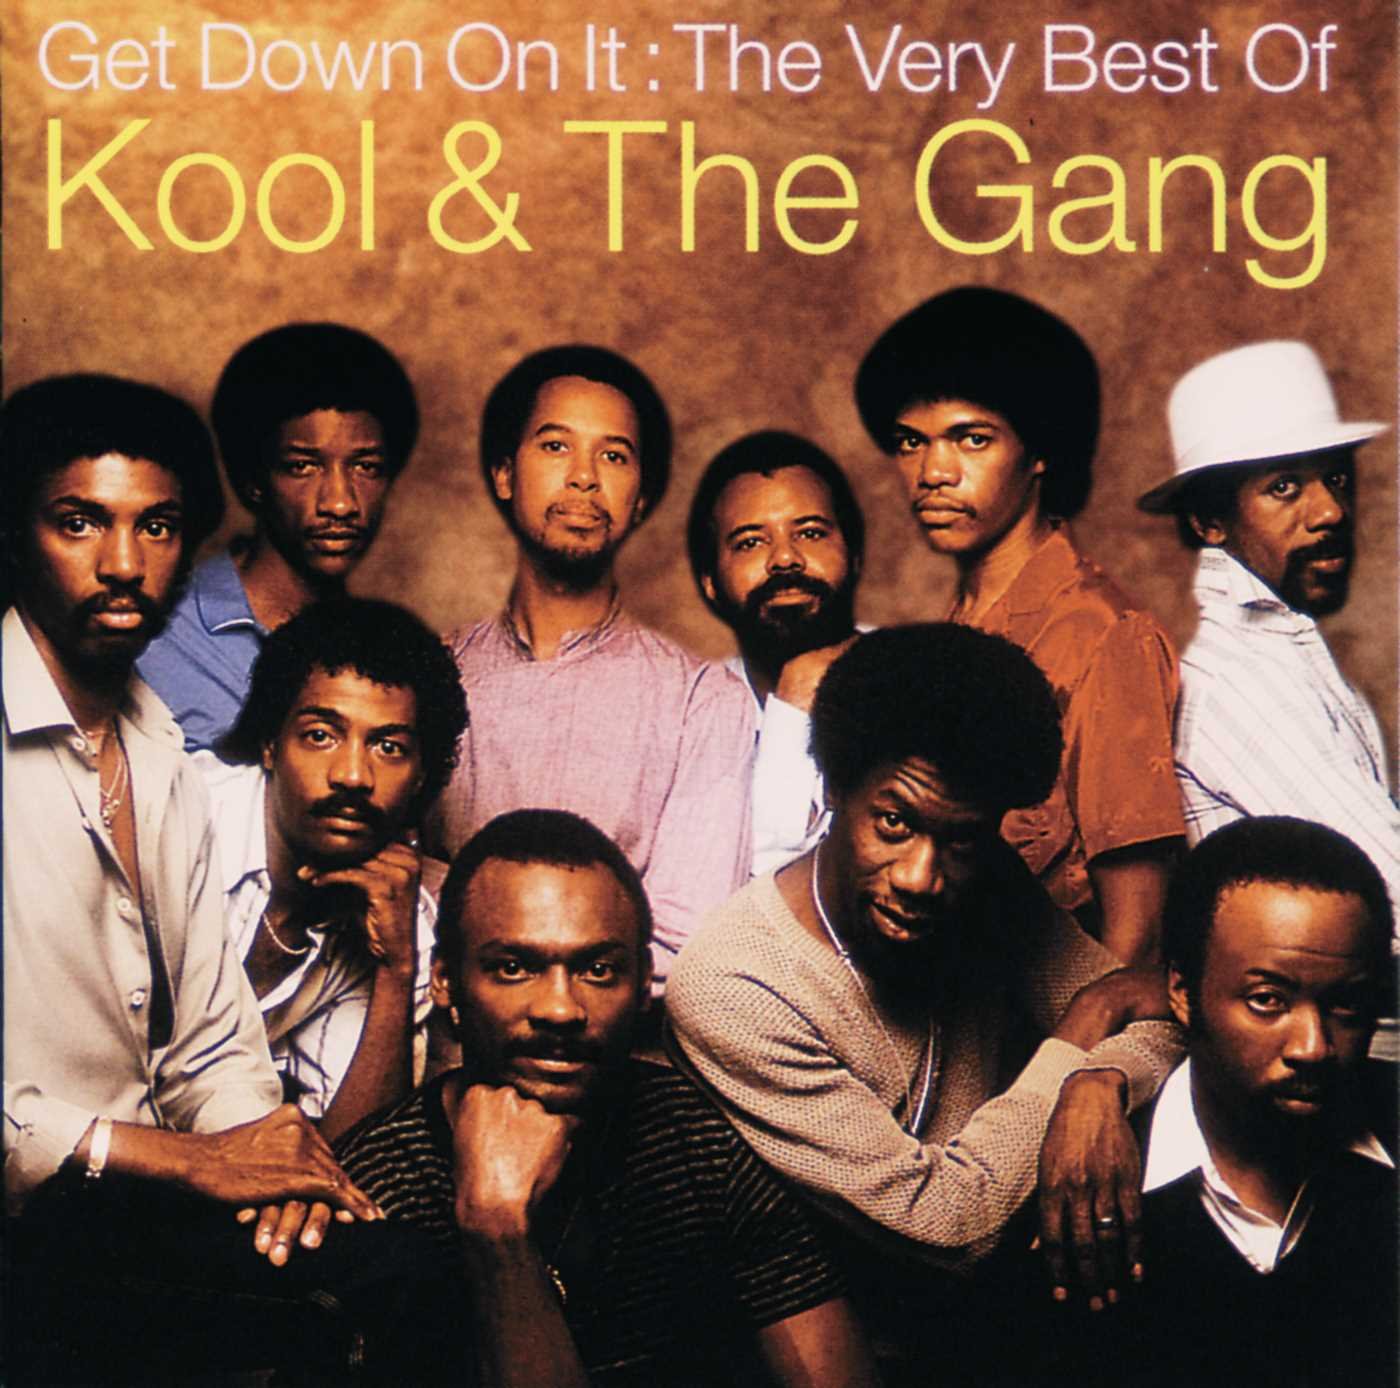 Kool & the Gang - Get Down on It The Very Best of Kool & the Gang (2000) FLAC Download